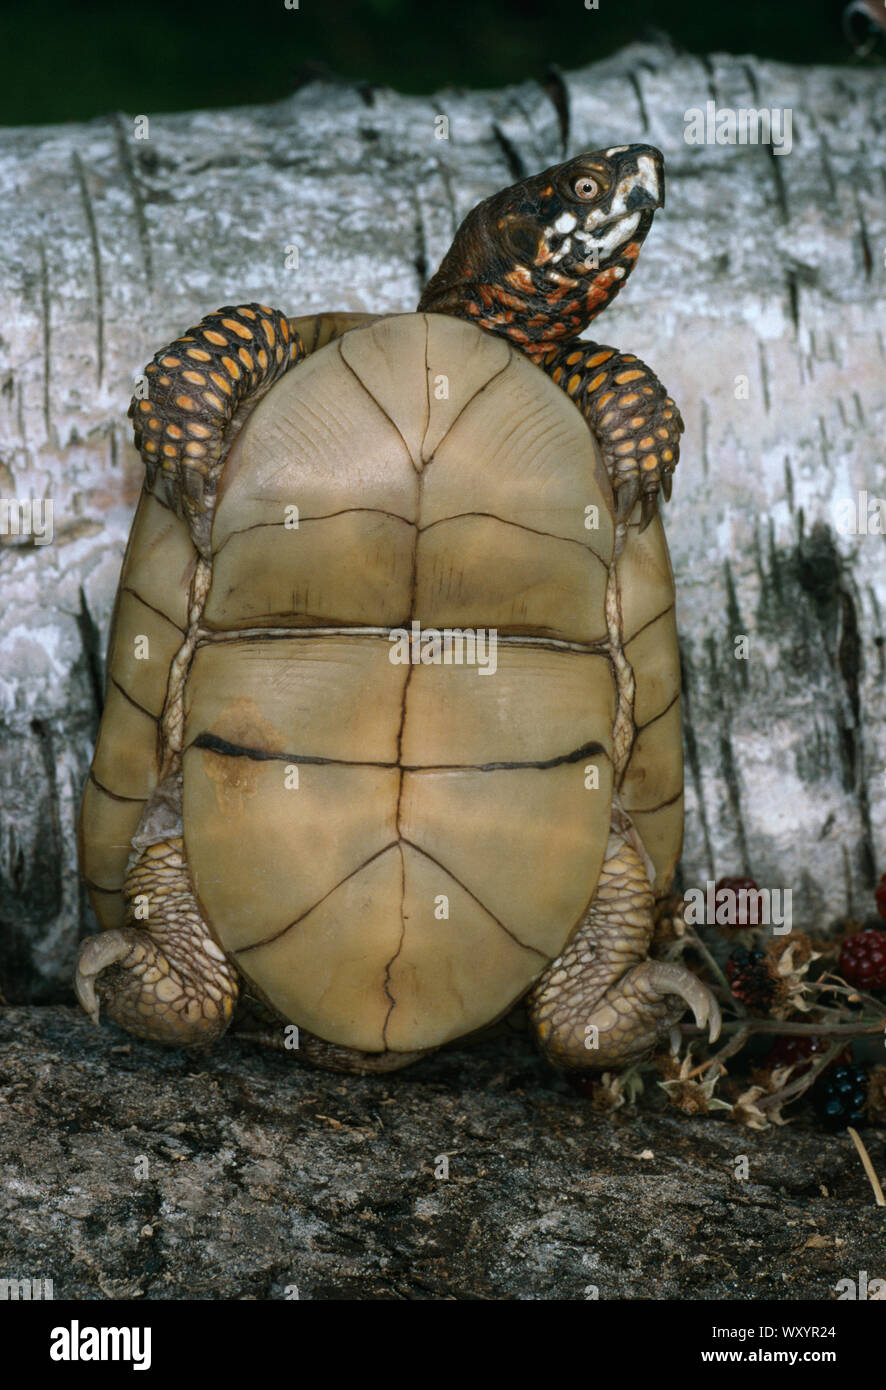 THREE-TOED BOX TURTLE (Terrapene carolina triunguis}. Positioned to show the underside (plastron) showing the midway hinge across the surface. Stock Photo